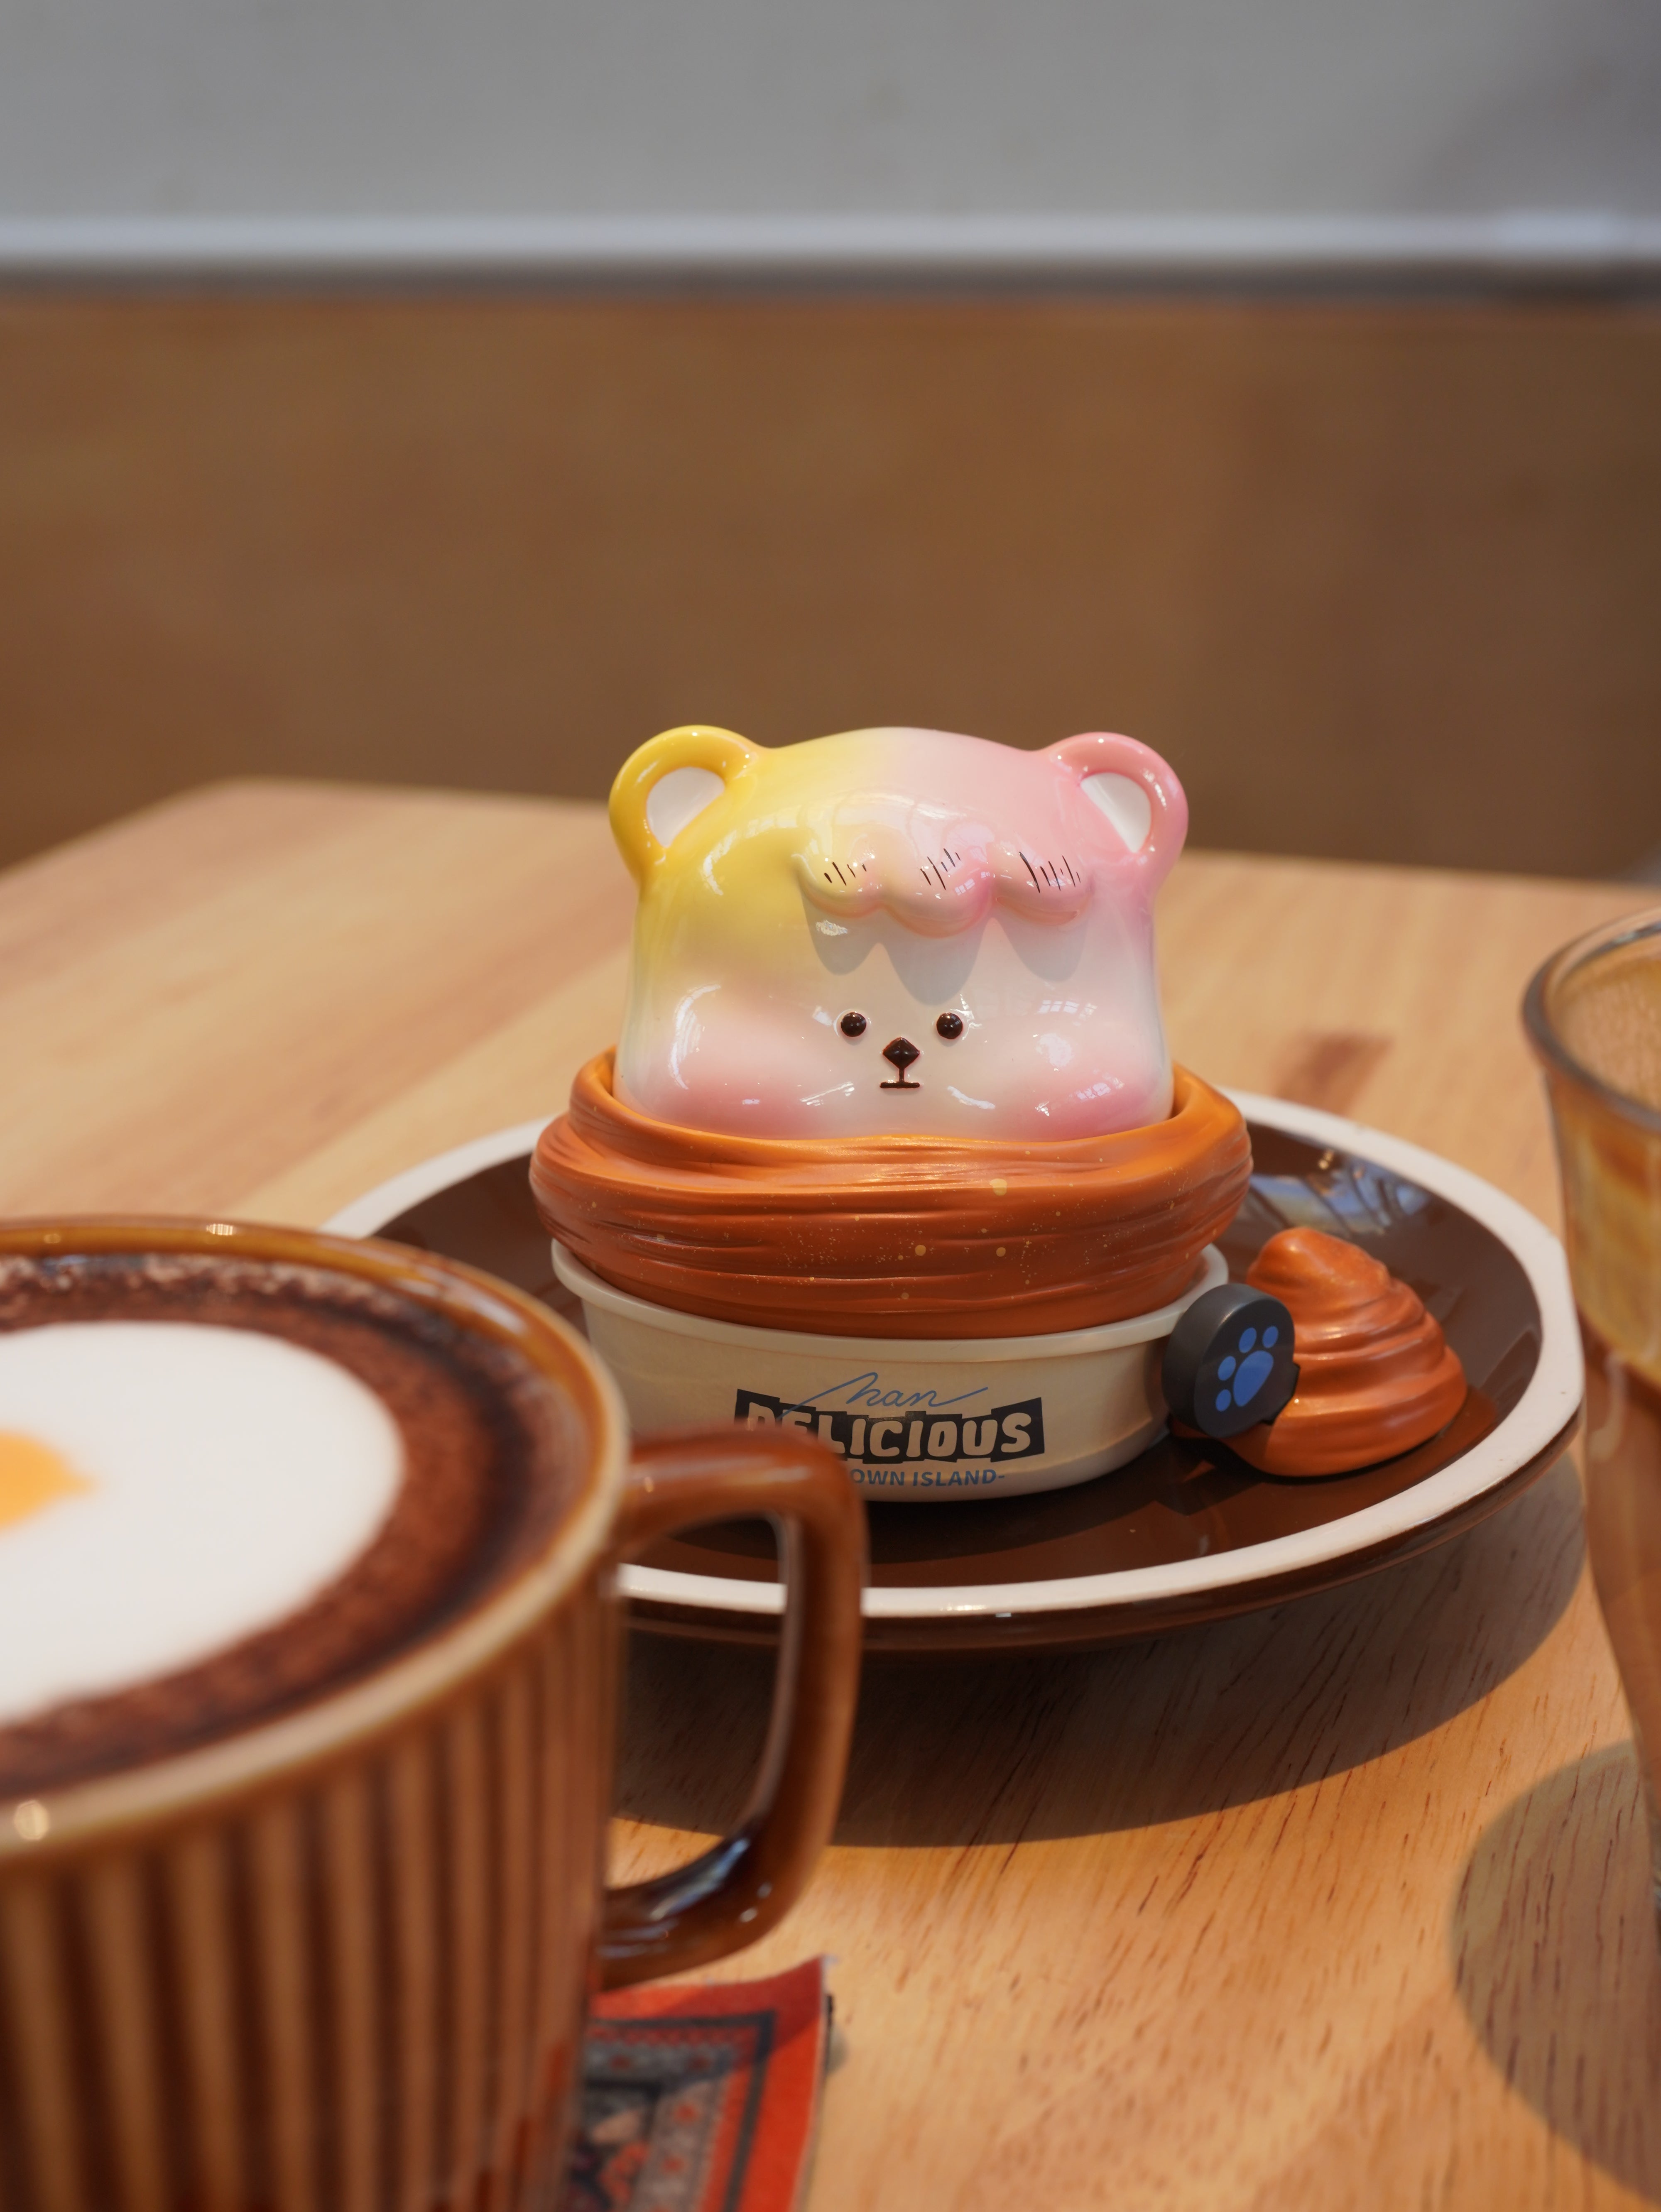 Croissant Han Han toy in coffee cup with saucer and toy bear on plate.